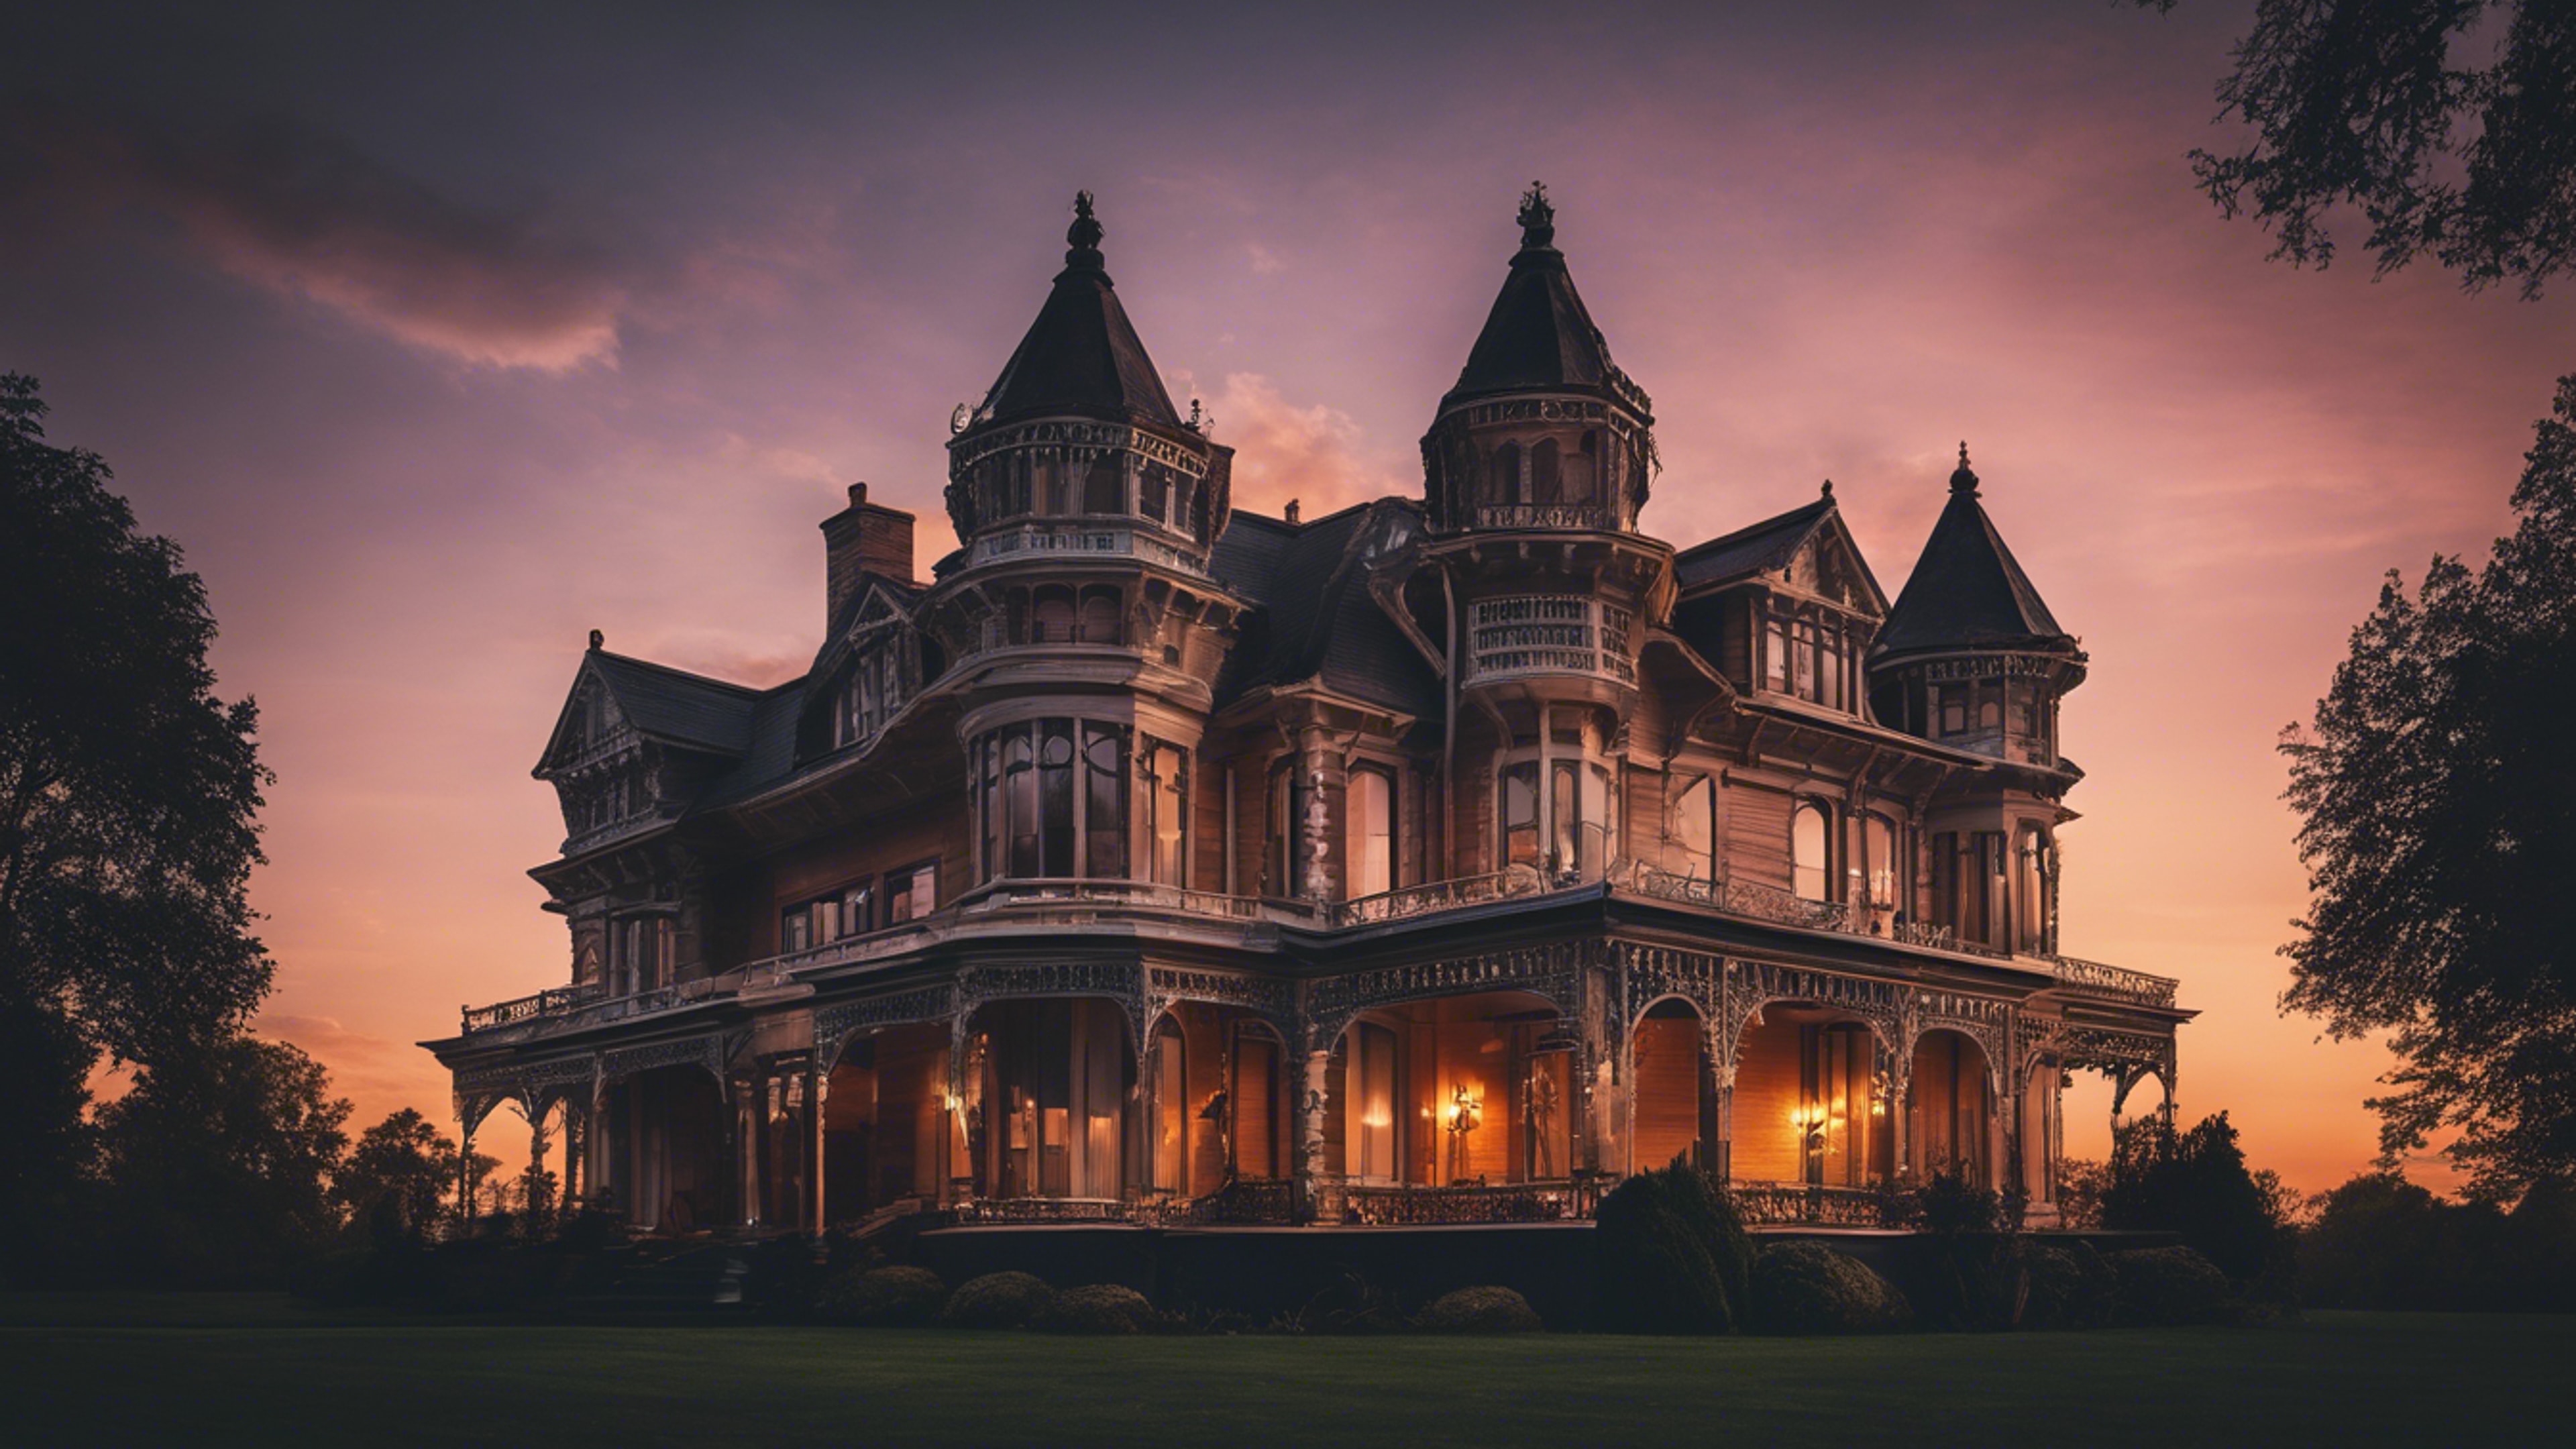 A grand Victorian mansion silhouetted by the warm lights of a beautiful sunset. Wallpaper[2ec34a3400fd4335b2a3]